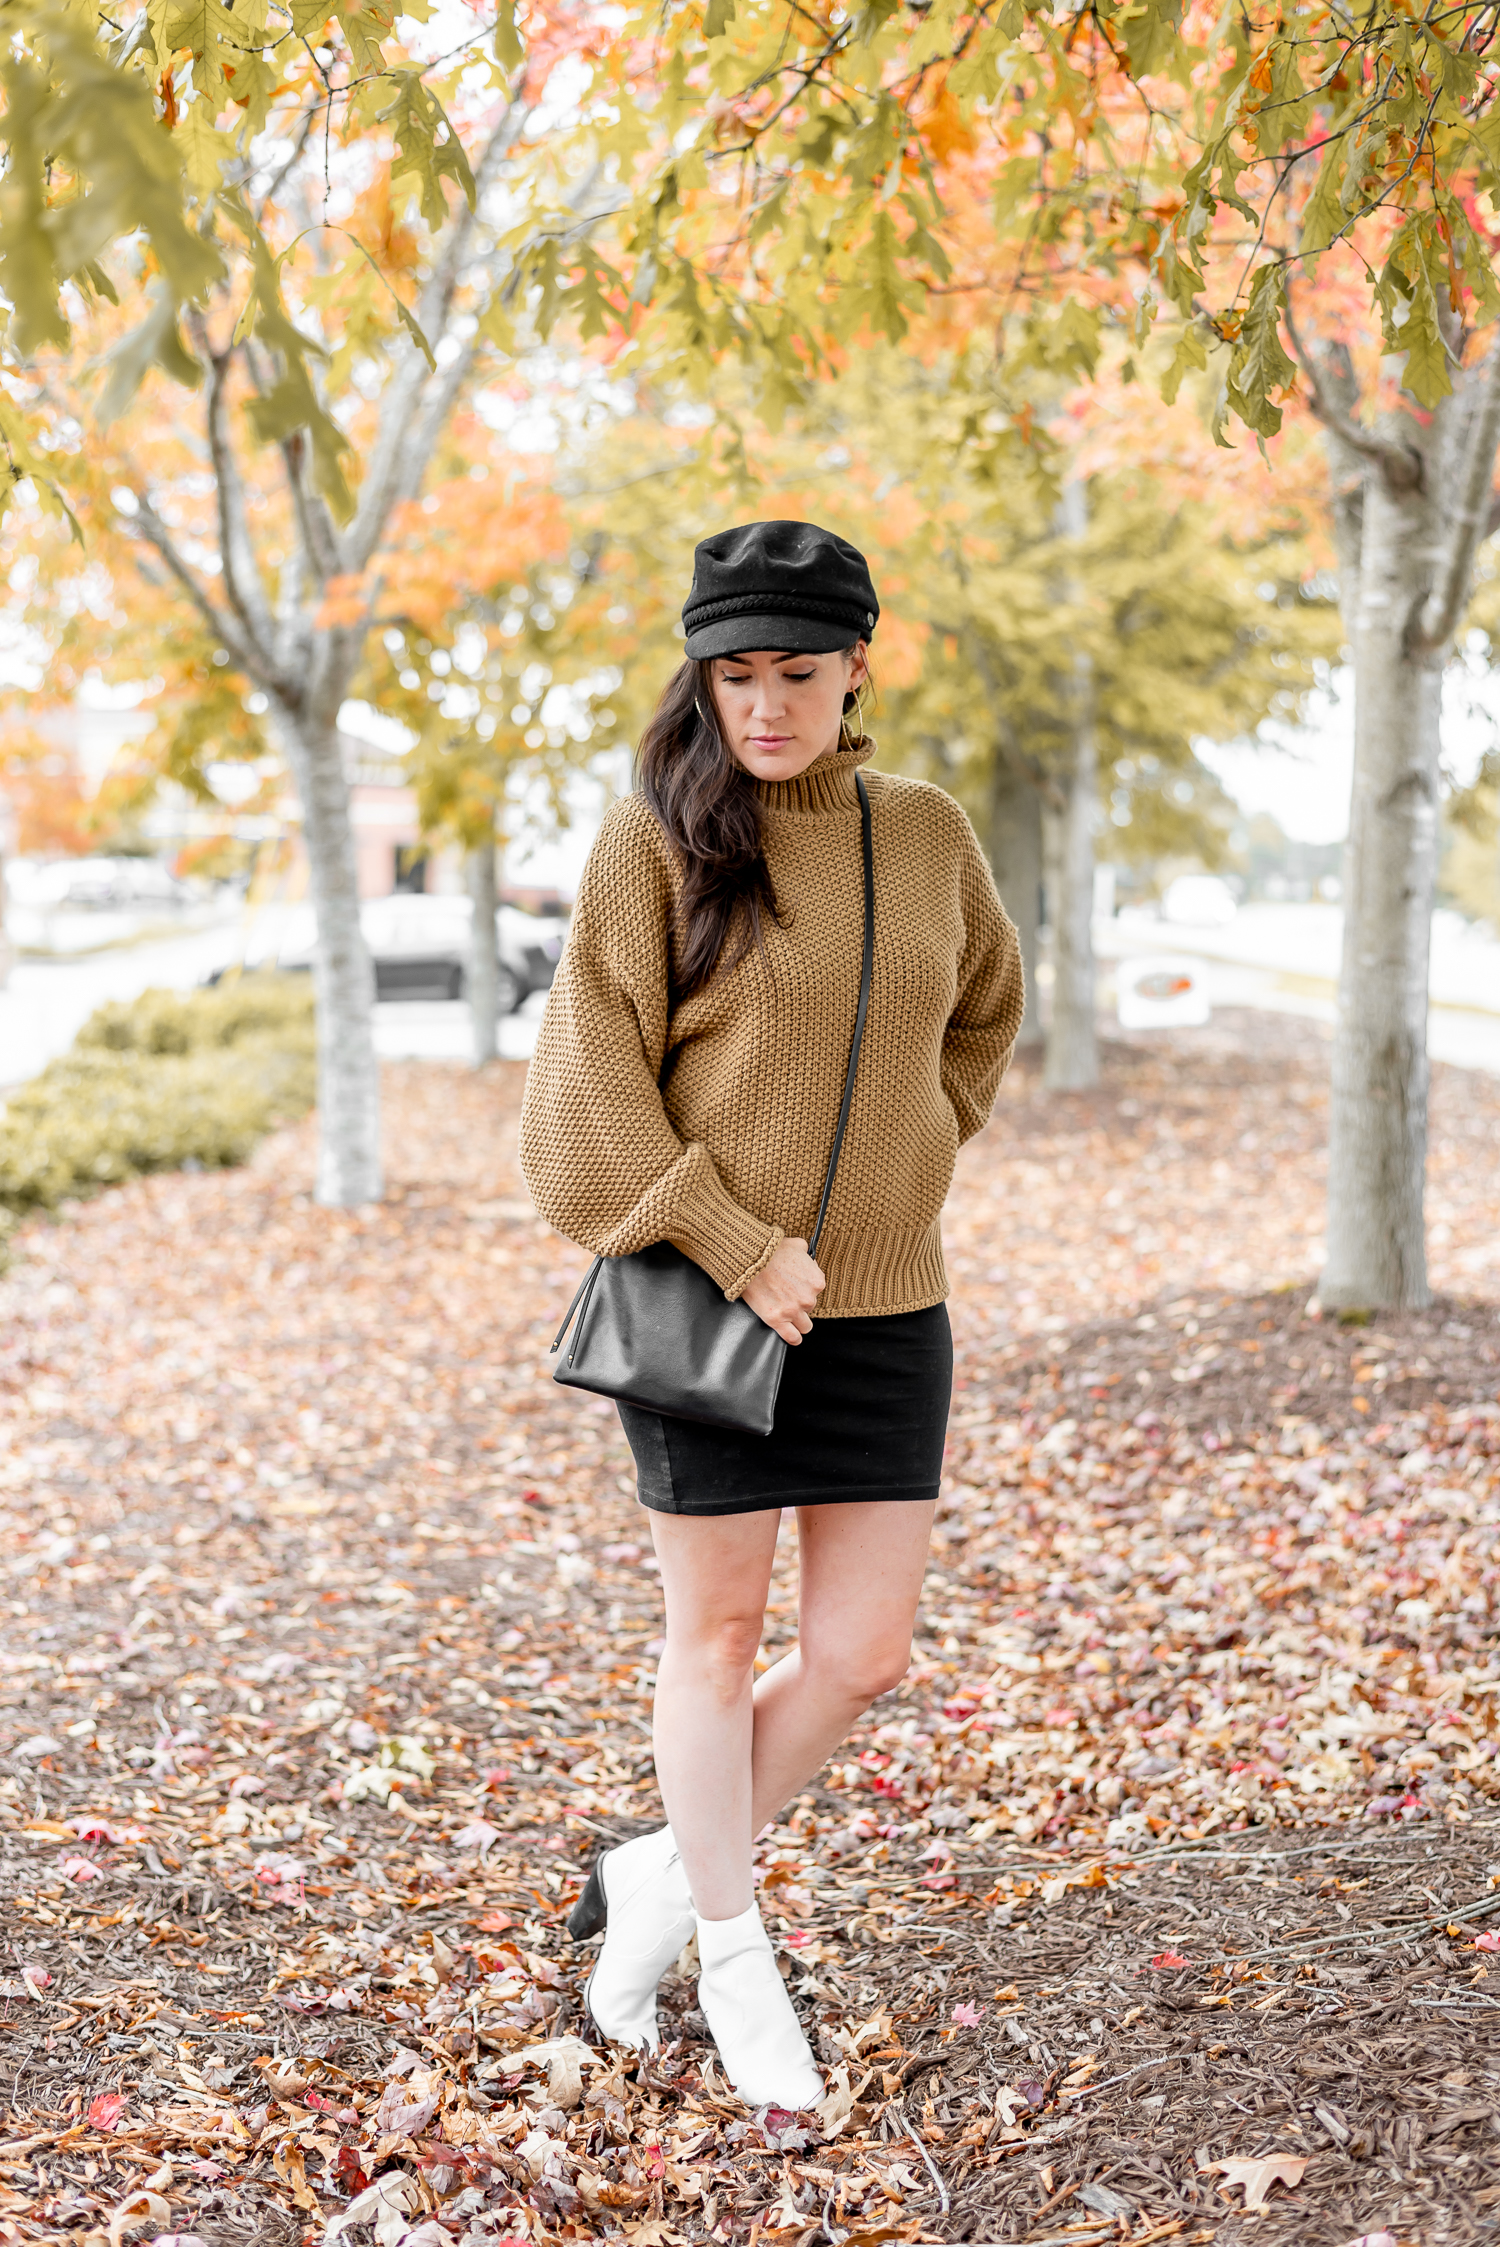 outfit of the day, chunky oversized sweater, fall fashion, outfit ideas, fall outfit ideas, fall styles, amazon sweater, atlanta style blogger, Erica Valentin, fashion bloggers in Atlanta